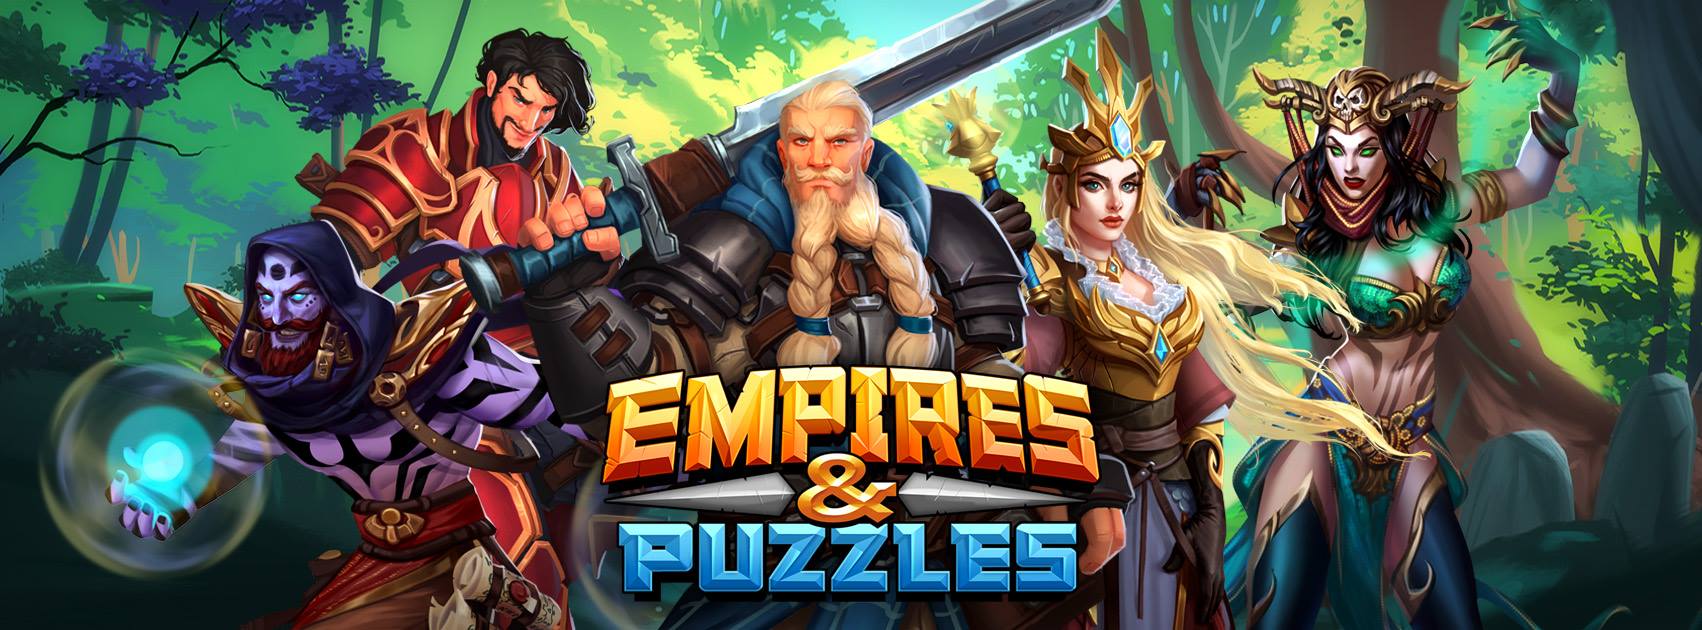 empires and puzzles hero academy